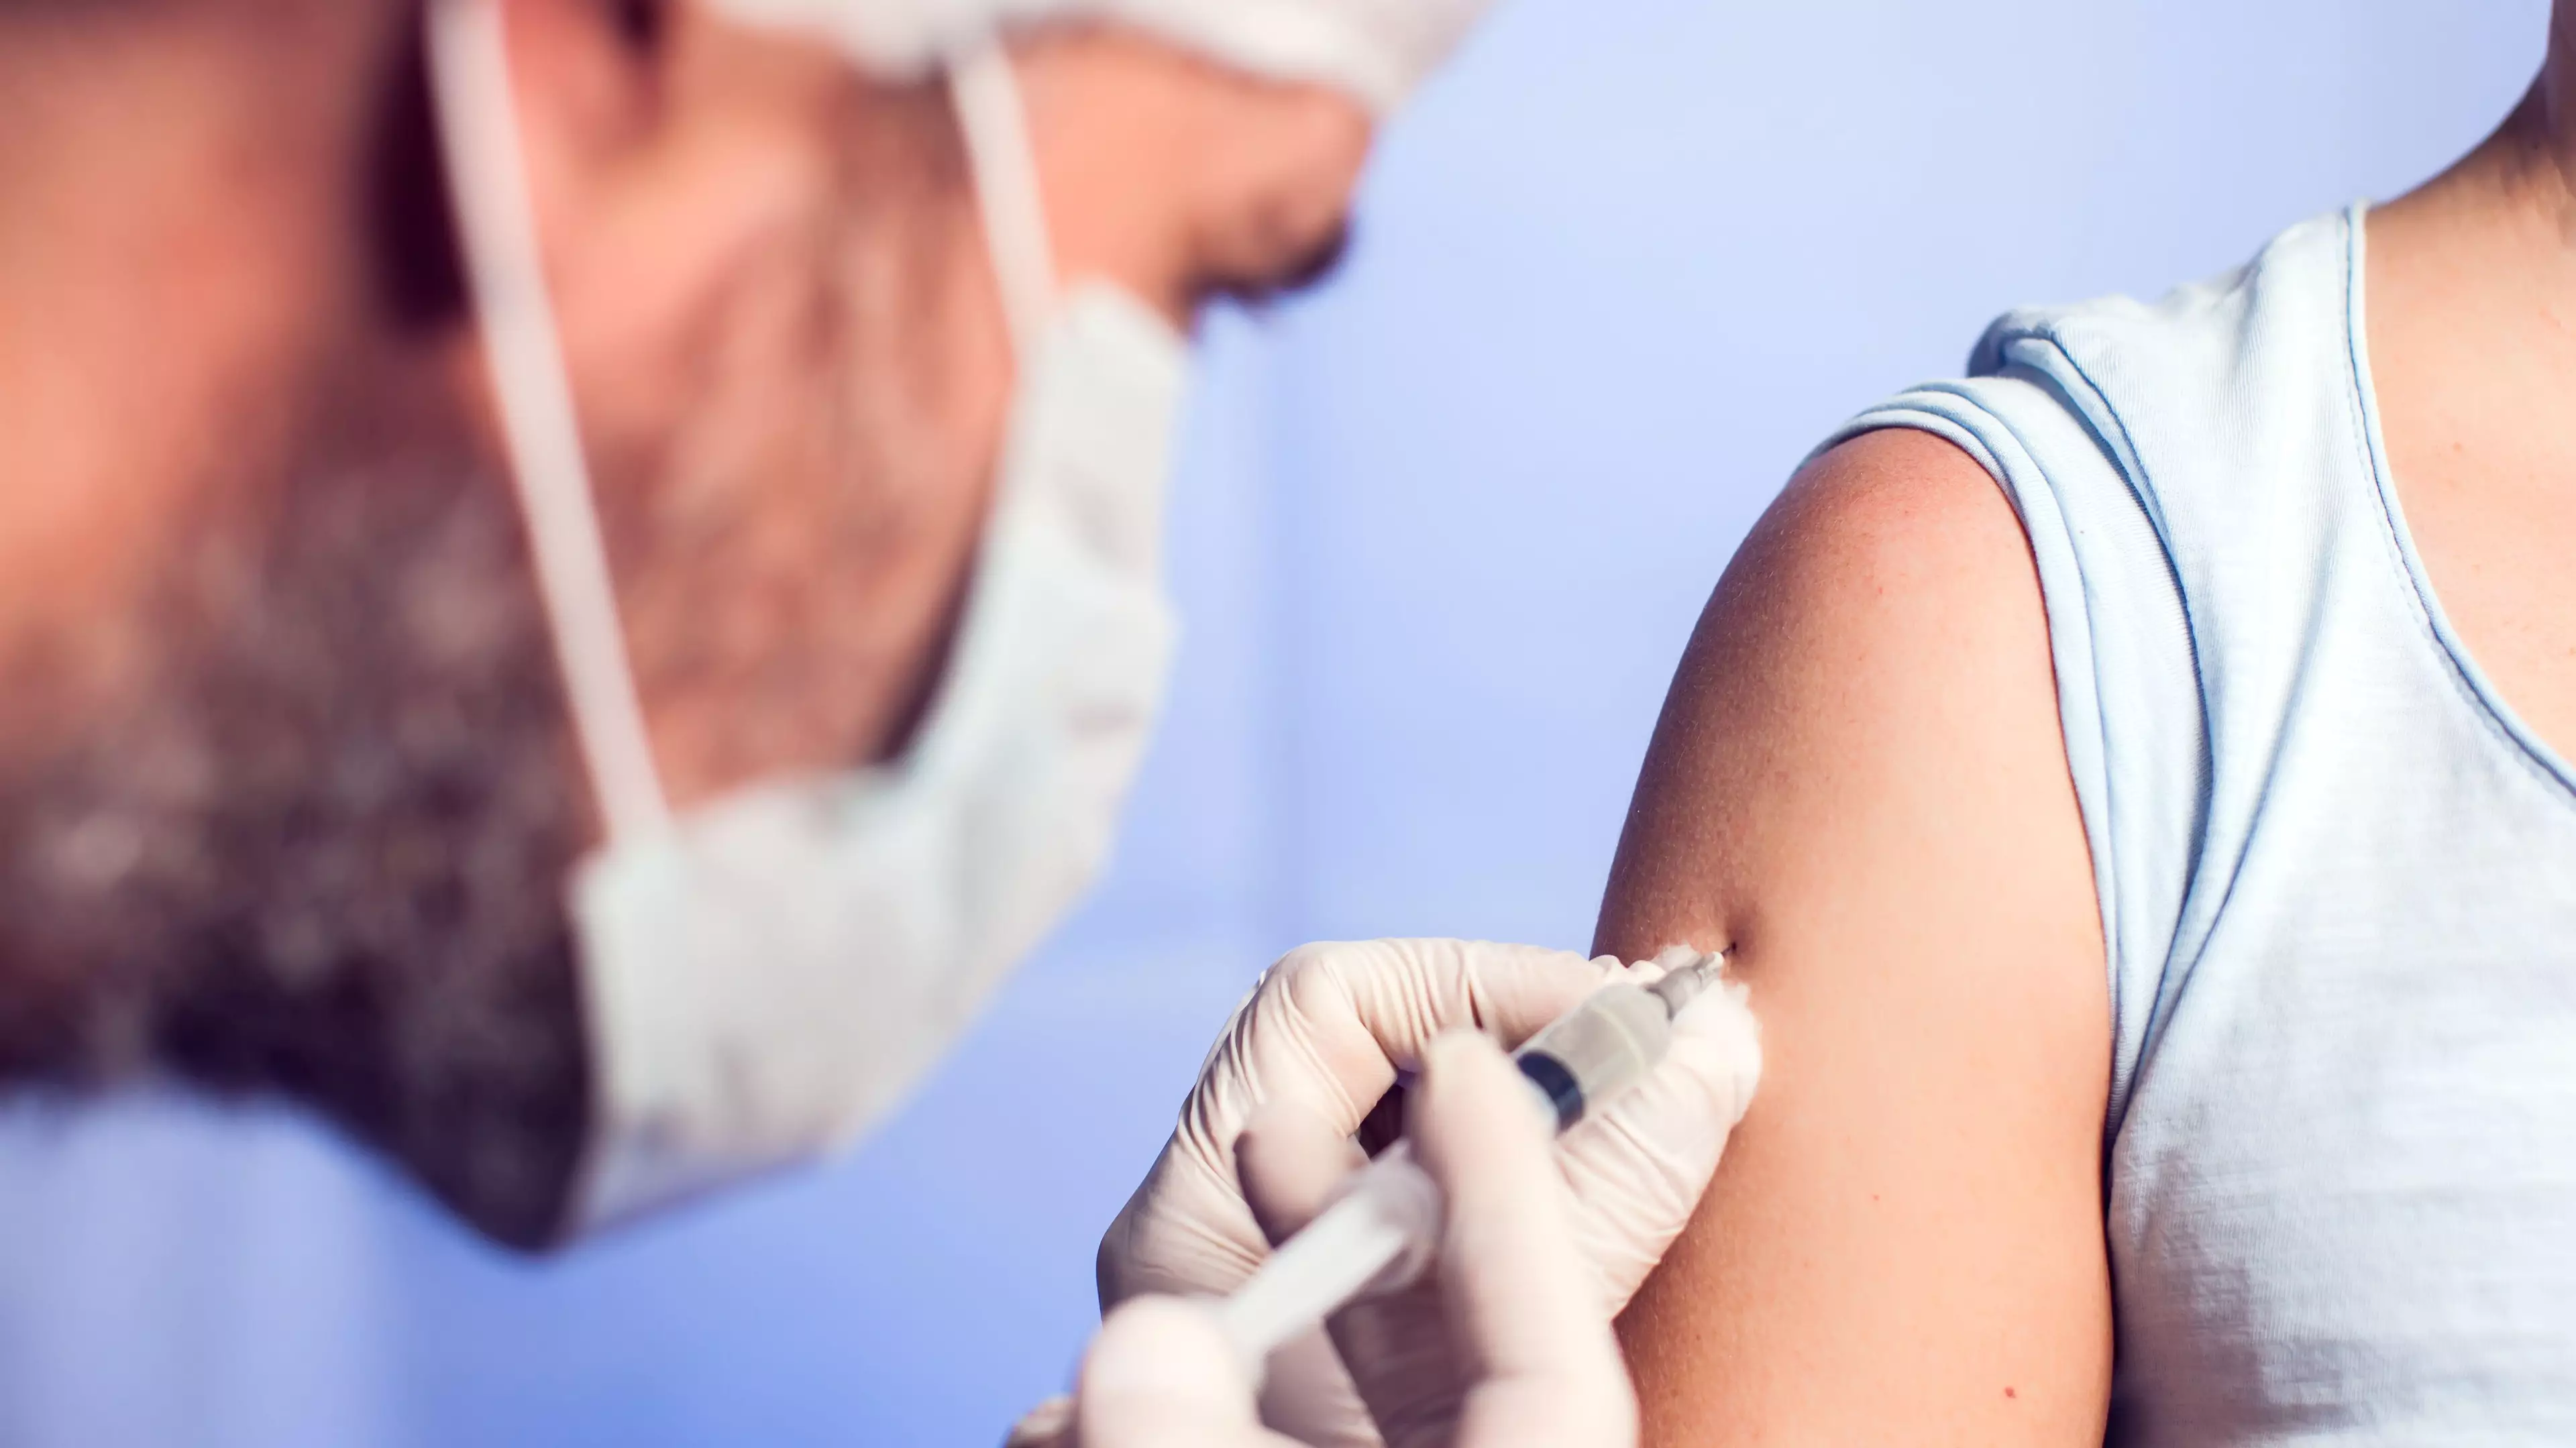 Aussie Expert Says Three Doses Of Covid-19 Vaccine Should Mean 'Fully Vaccinated'